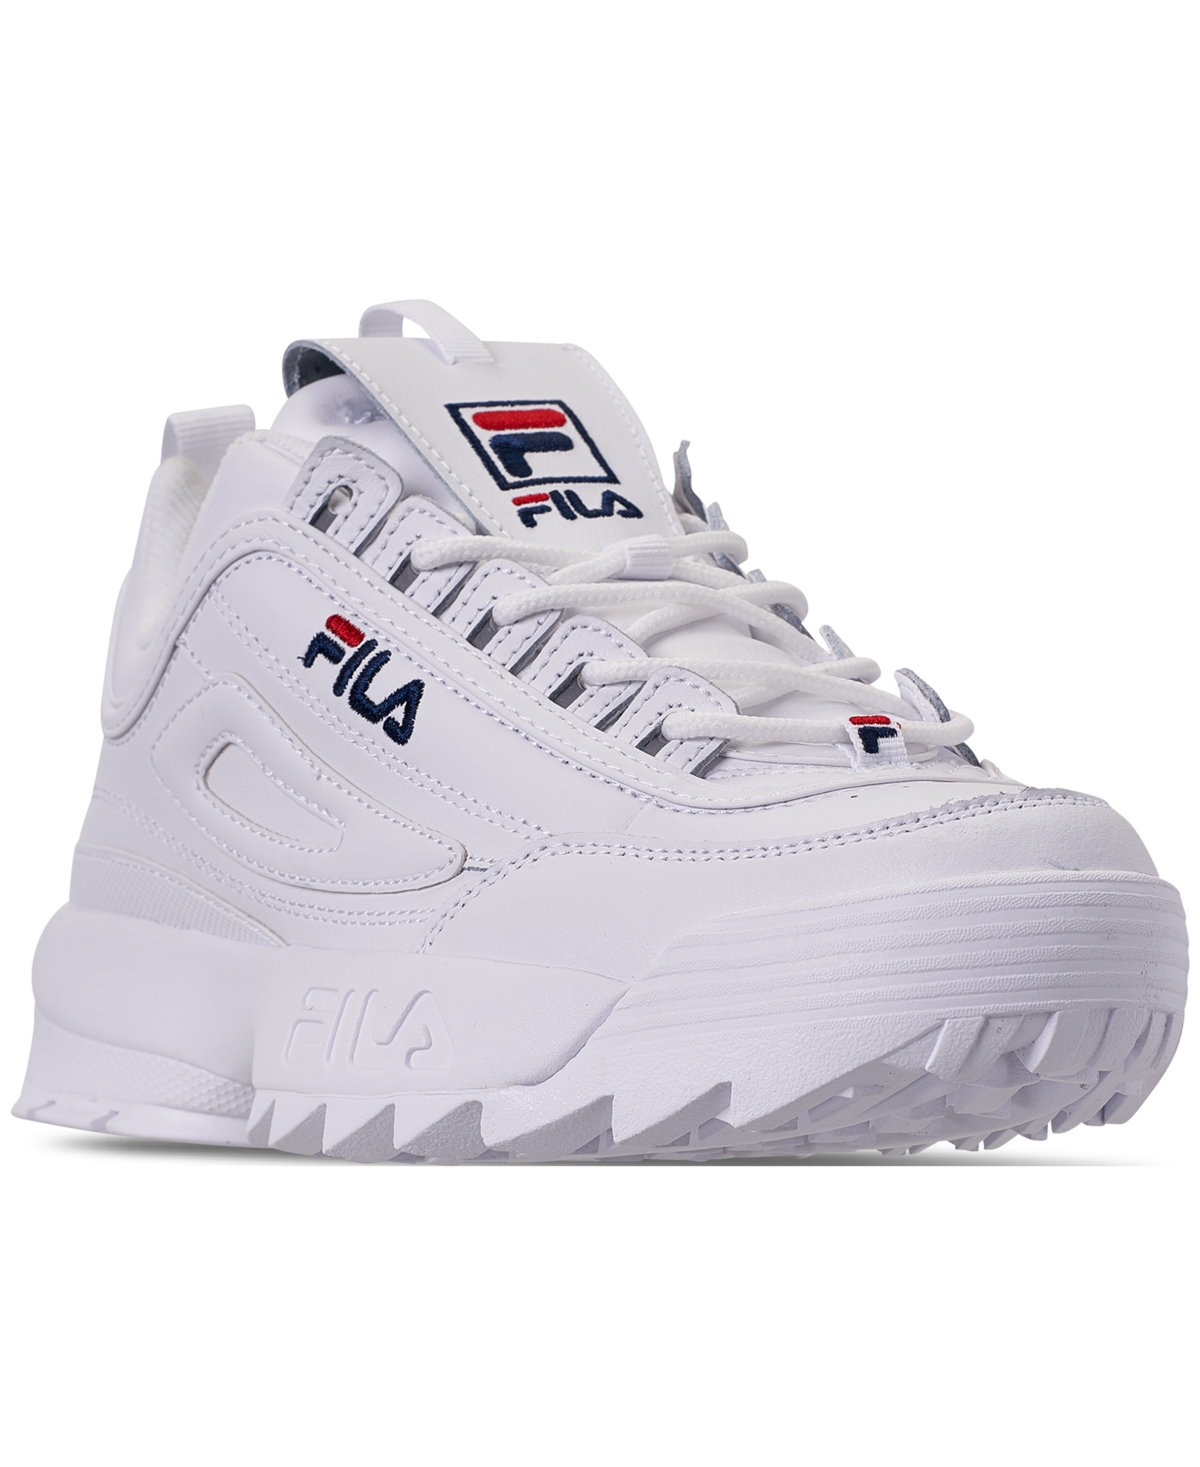 Fila Men's Disruptor Ii Casual Athletic Sneakers From Finish Line In White, Navy, Red